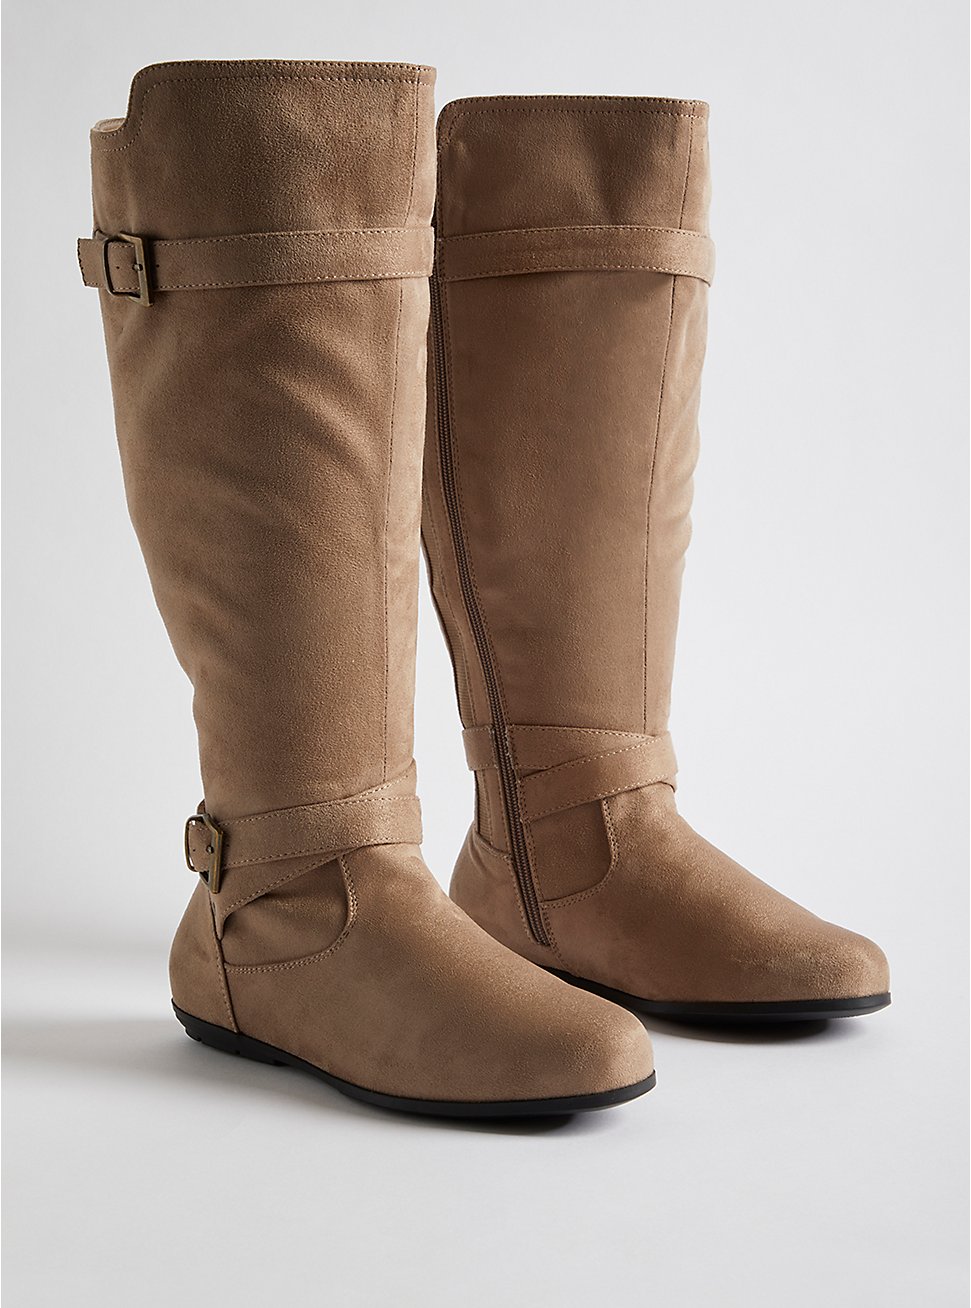 Double Buckle Knee Boot - Taupe Faux Suede (WW) , TAUPE, hi-res